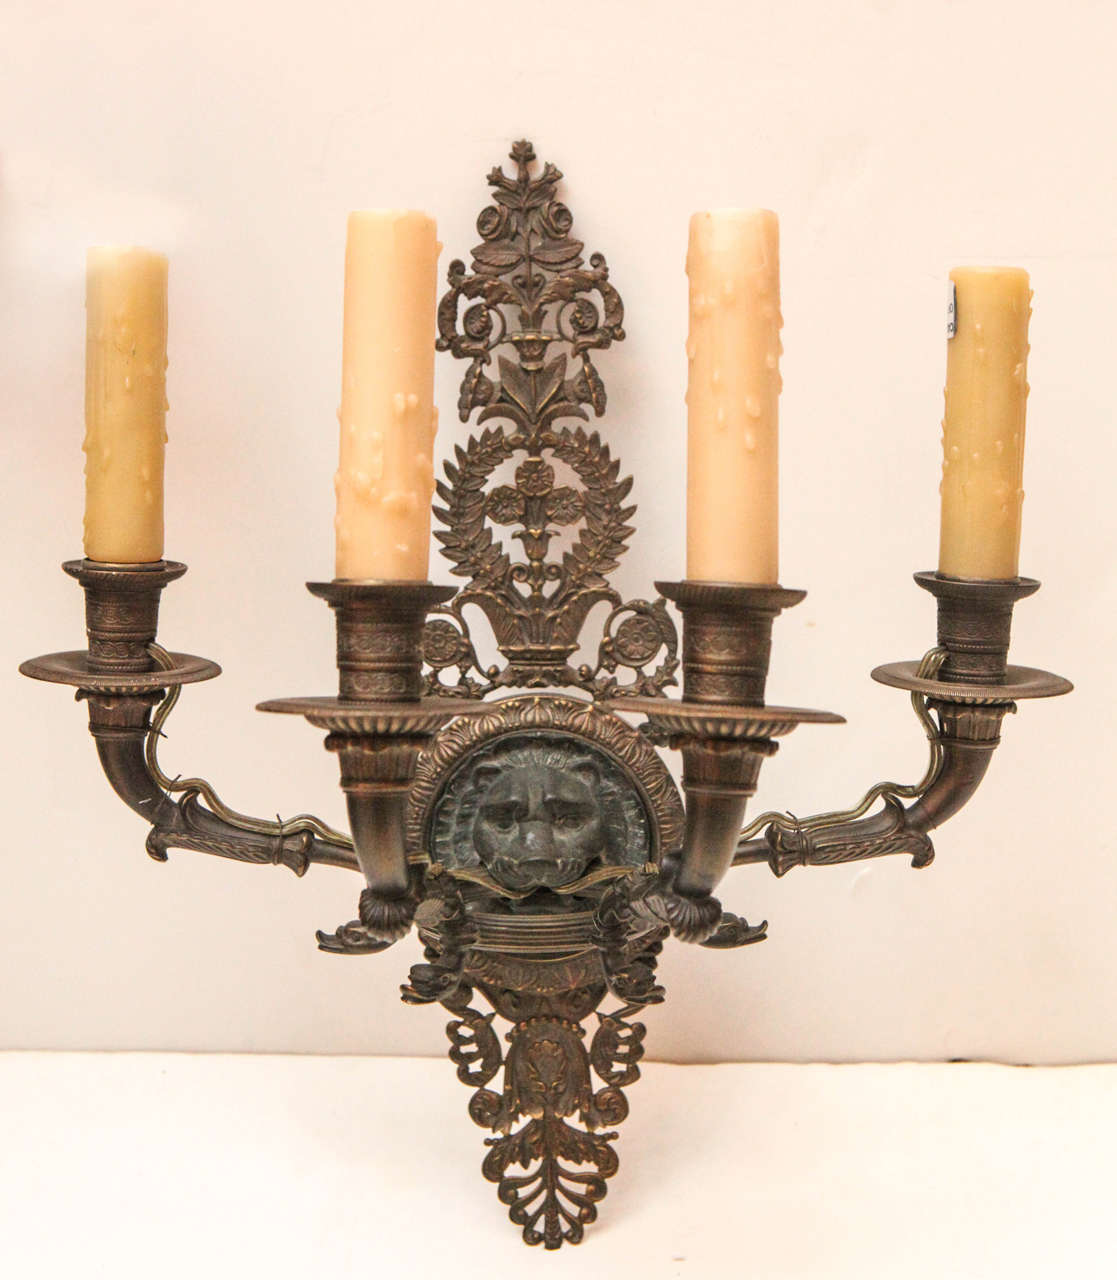 Two hand-cast electrified French wall sconces with intricate, foliate motifs and lion medallions.